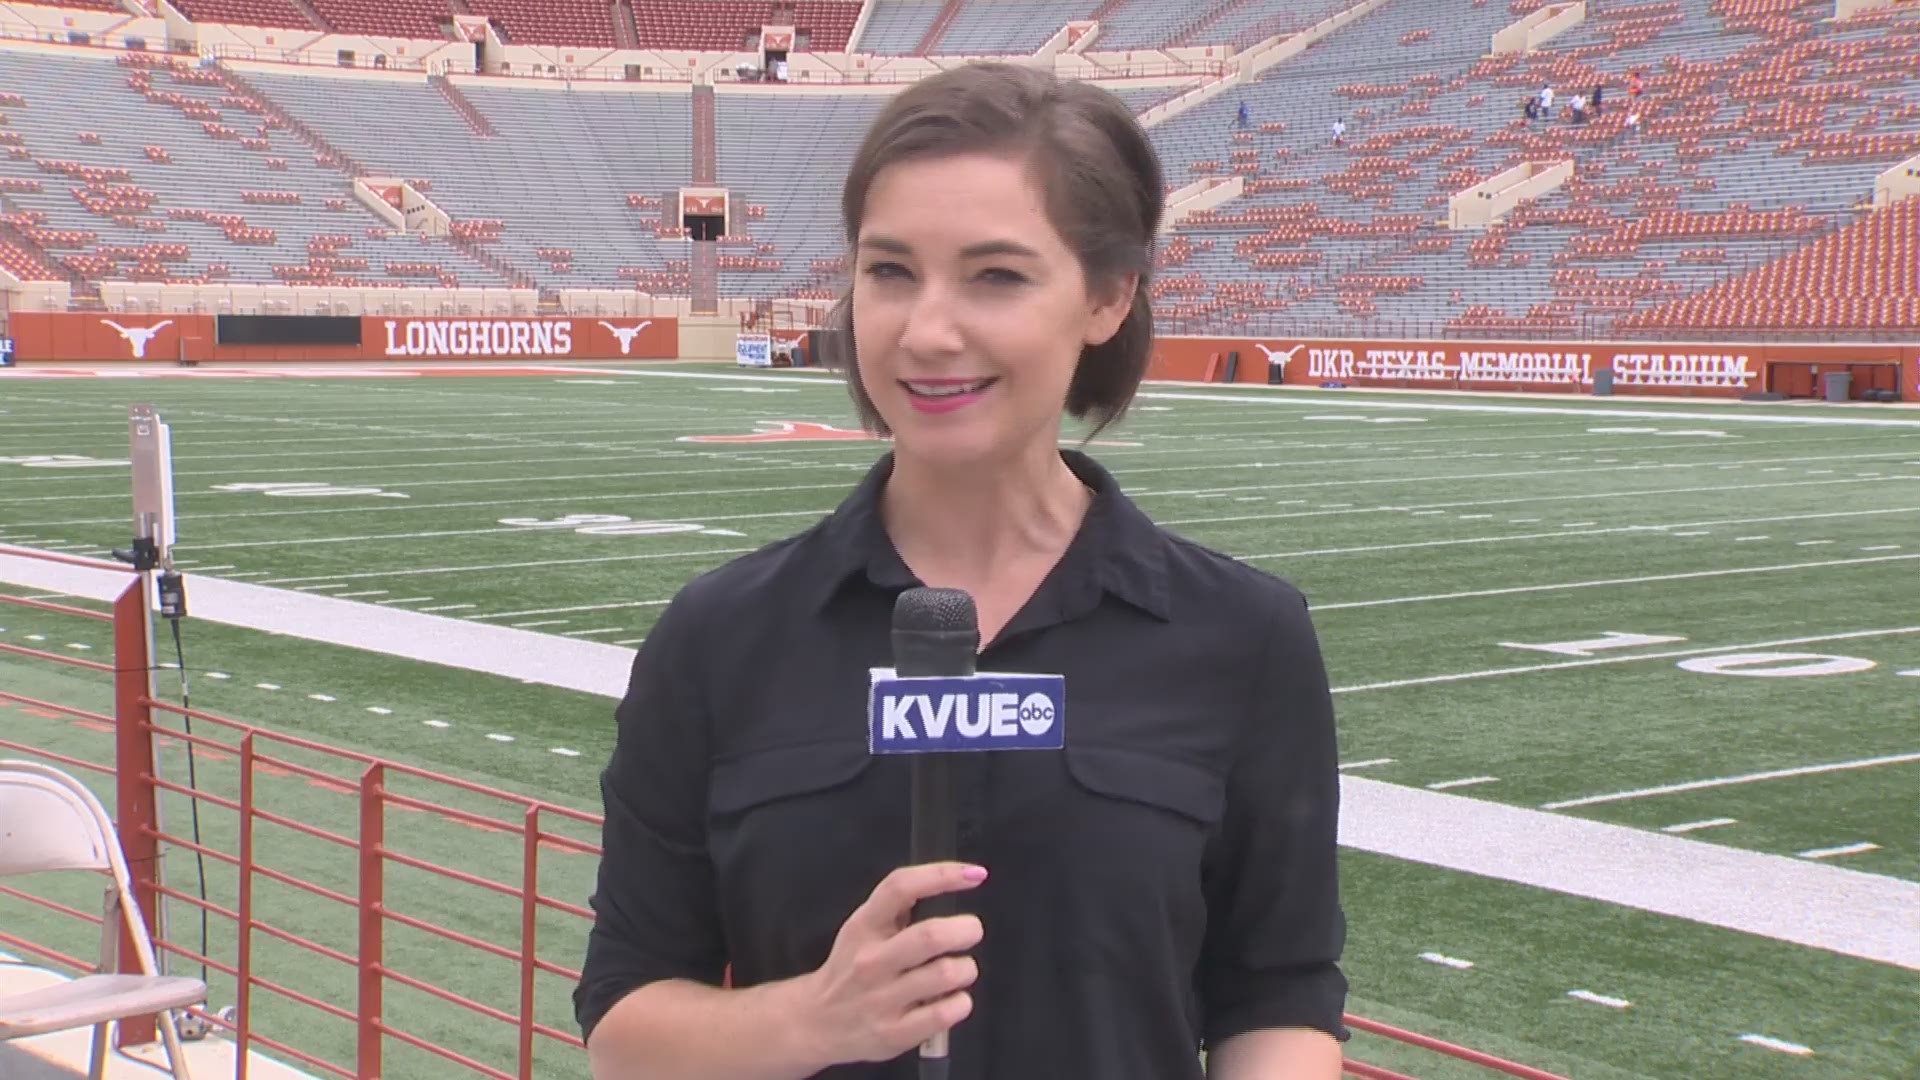 KVUE's Stacy Slayden has more on the high expectations of the Longhorns